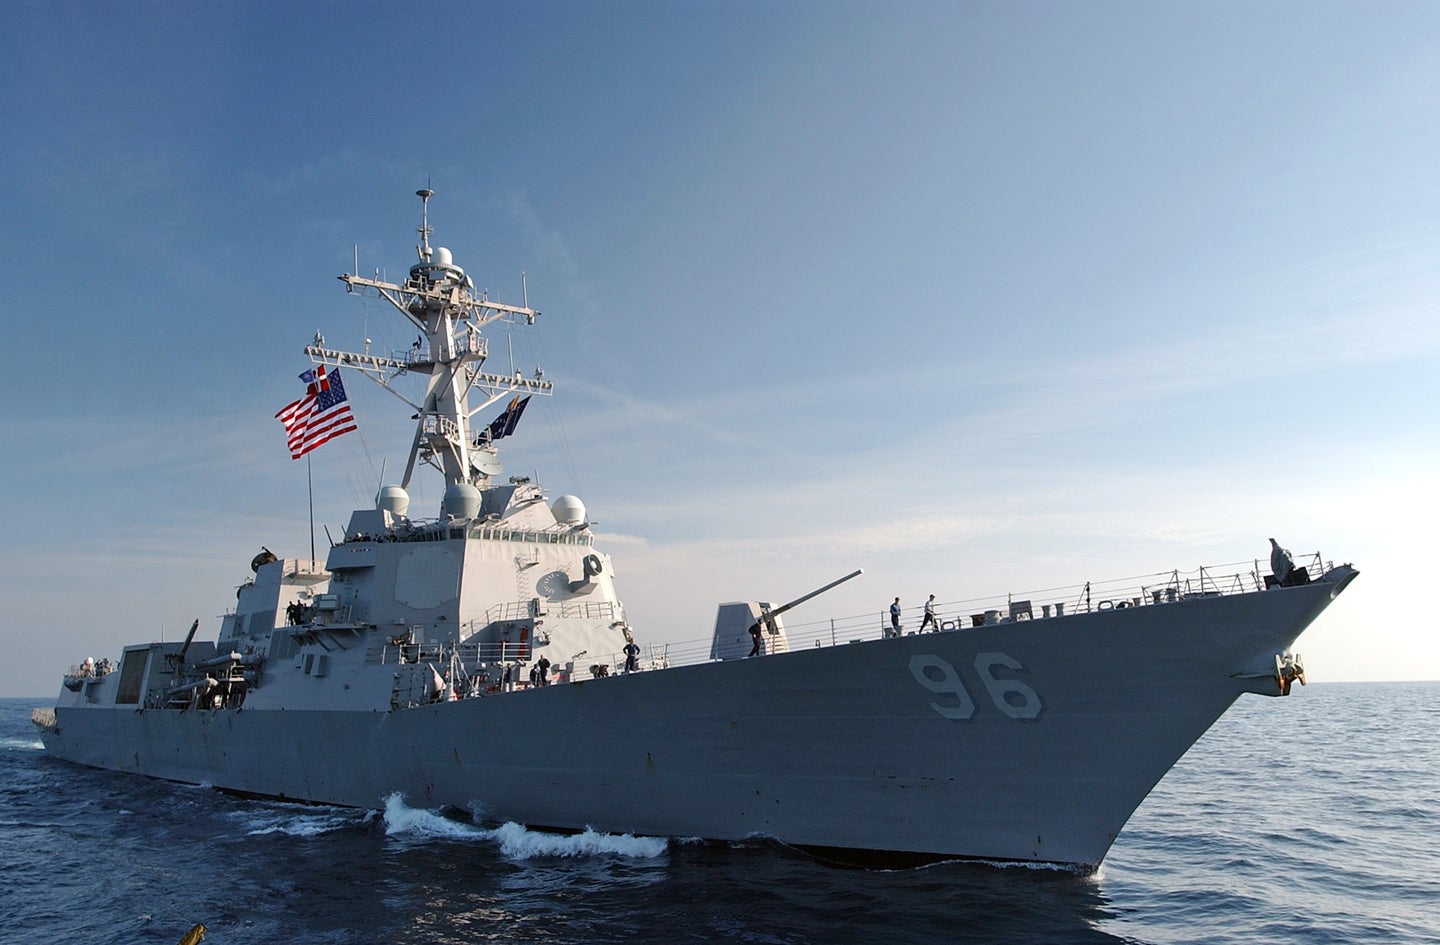 The guided-missile destroyer USS Bainbridge is underway off the coast of Somalia, Sept. 25, 2007, while conducting anti-piracy operations. (U.S. Navy)